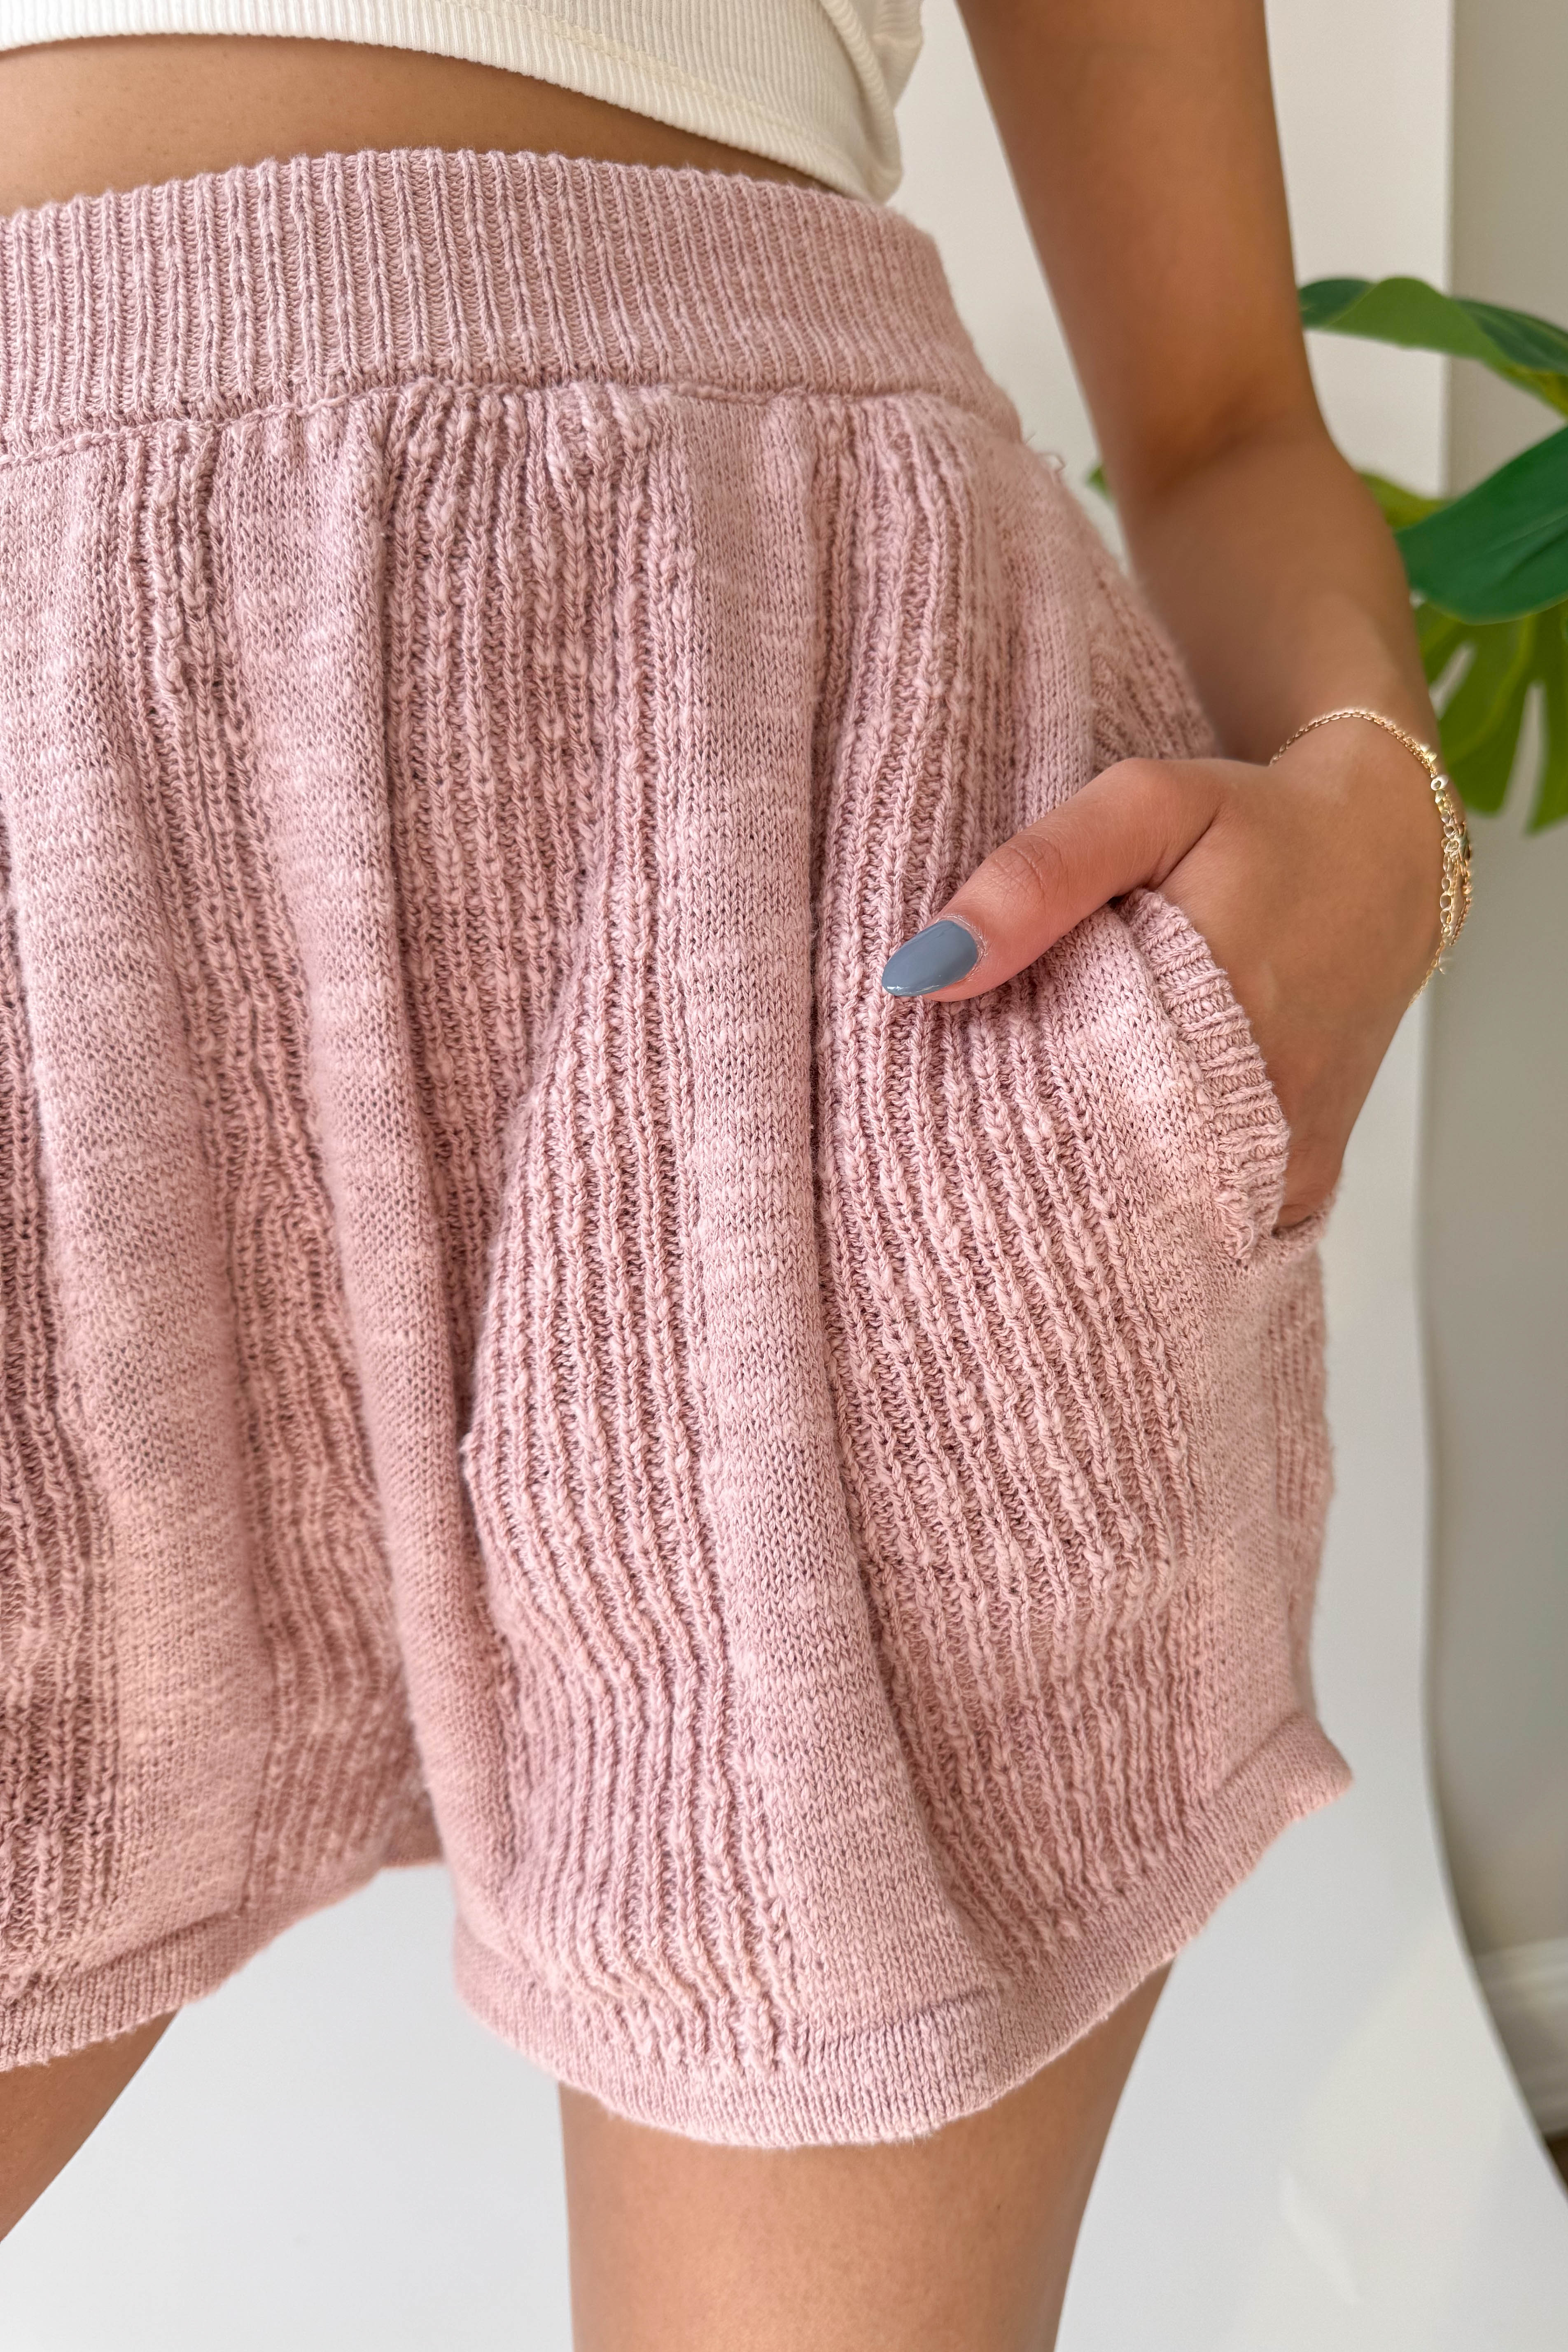 Just Like You Shorts in Dusty Rose